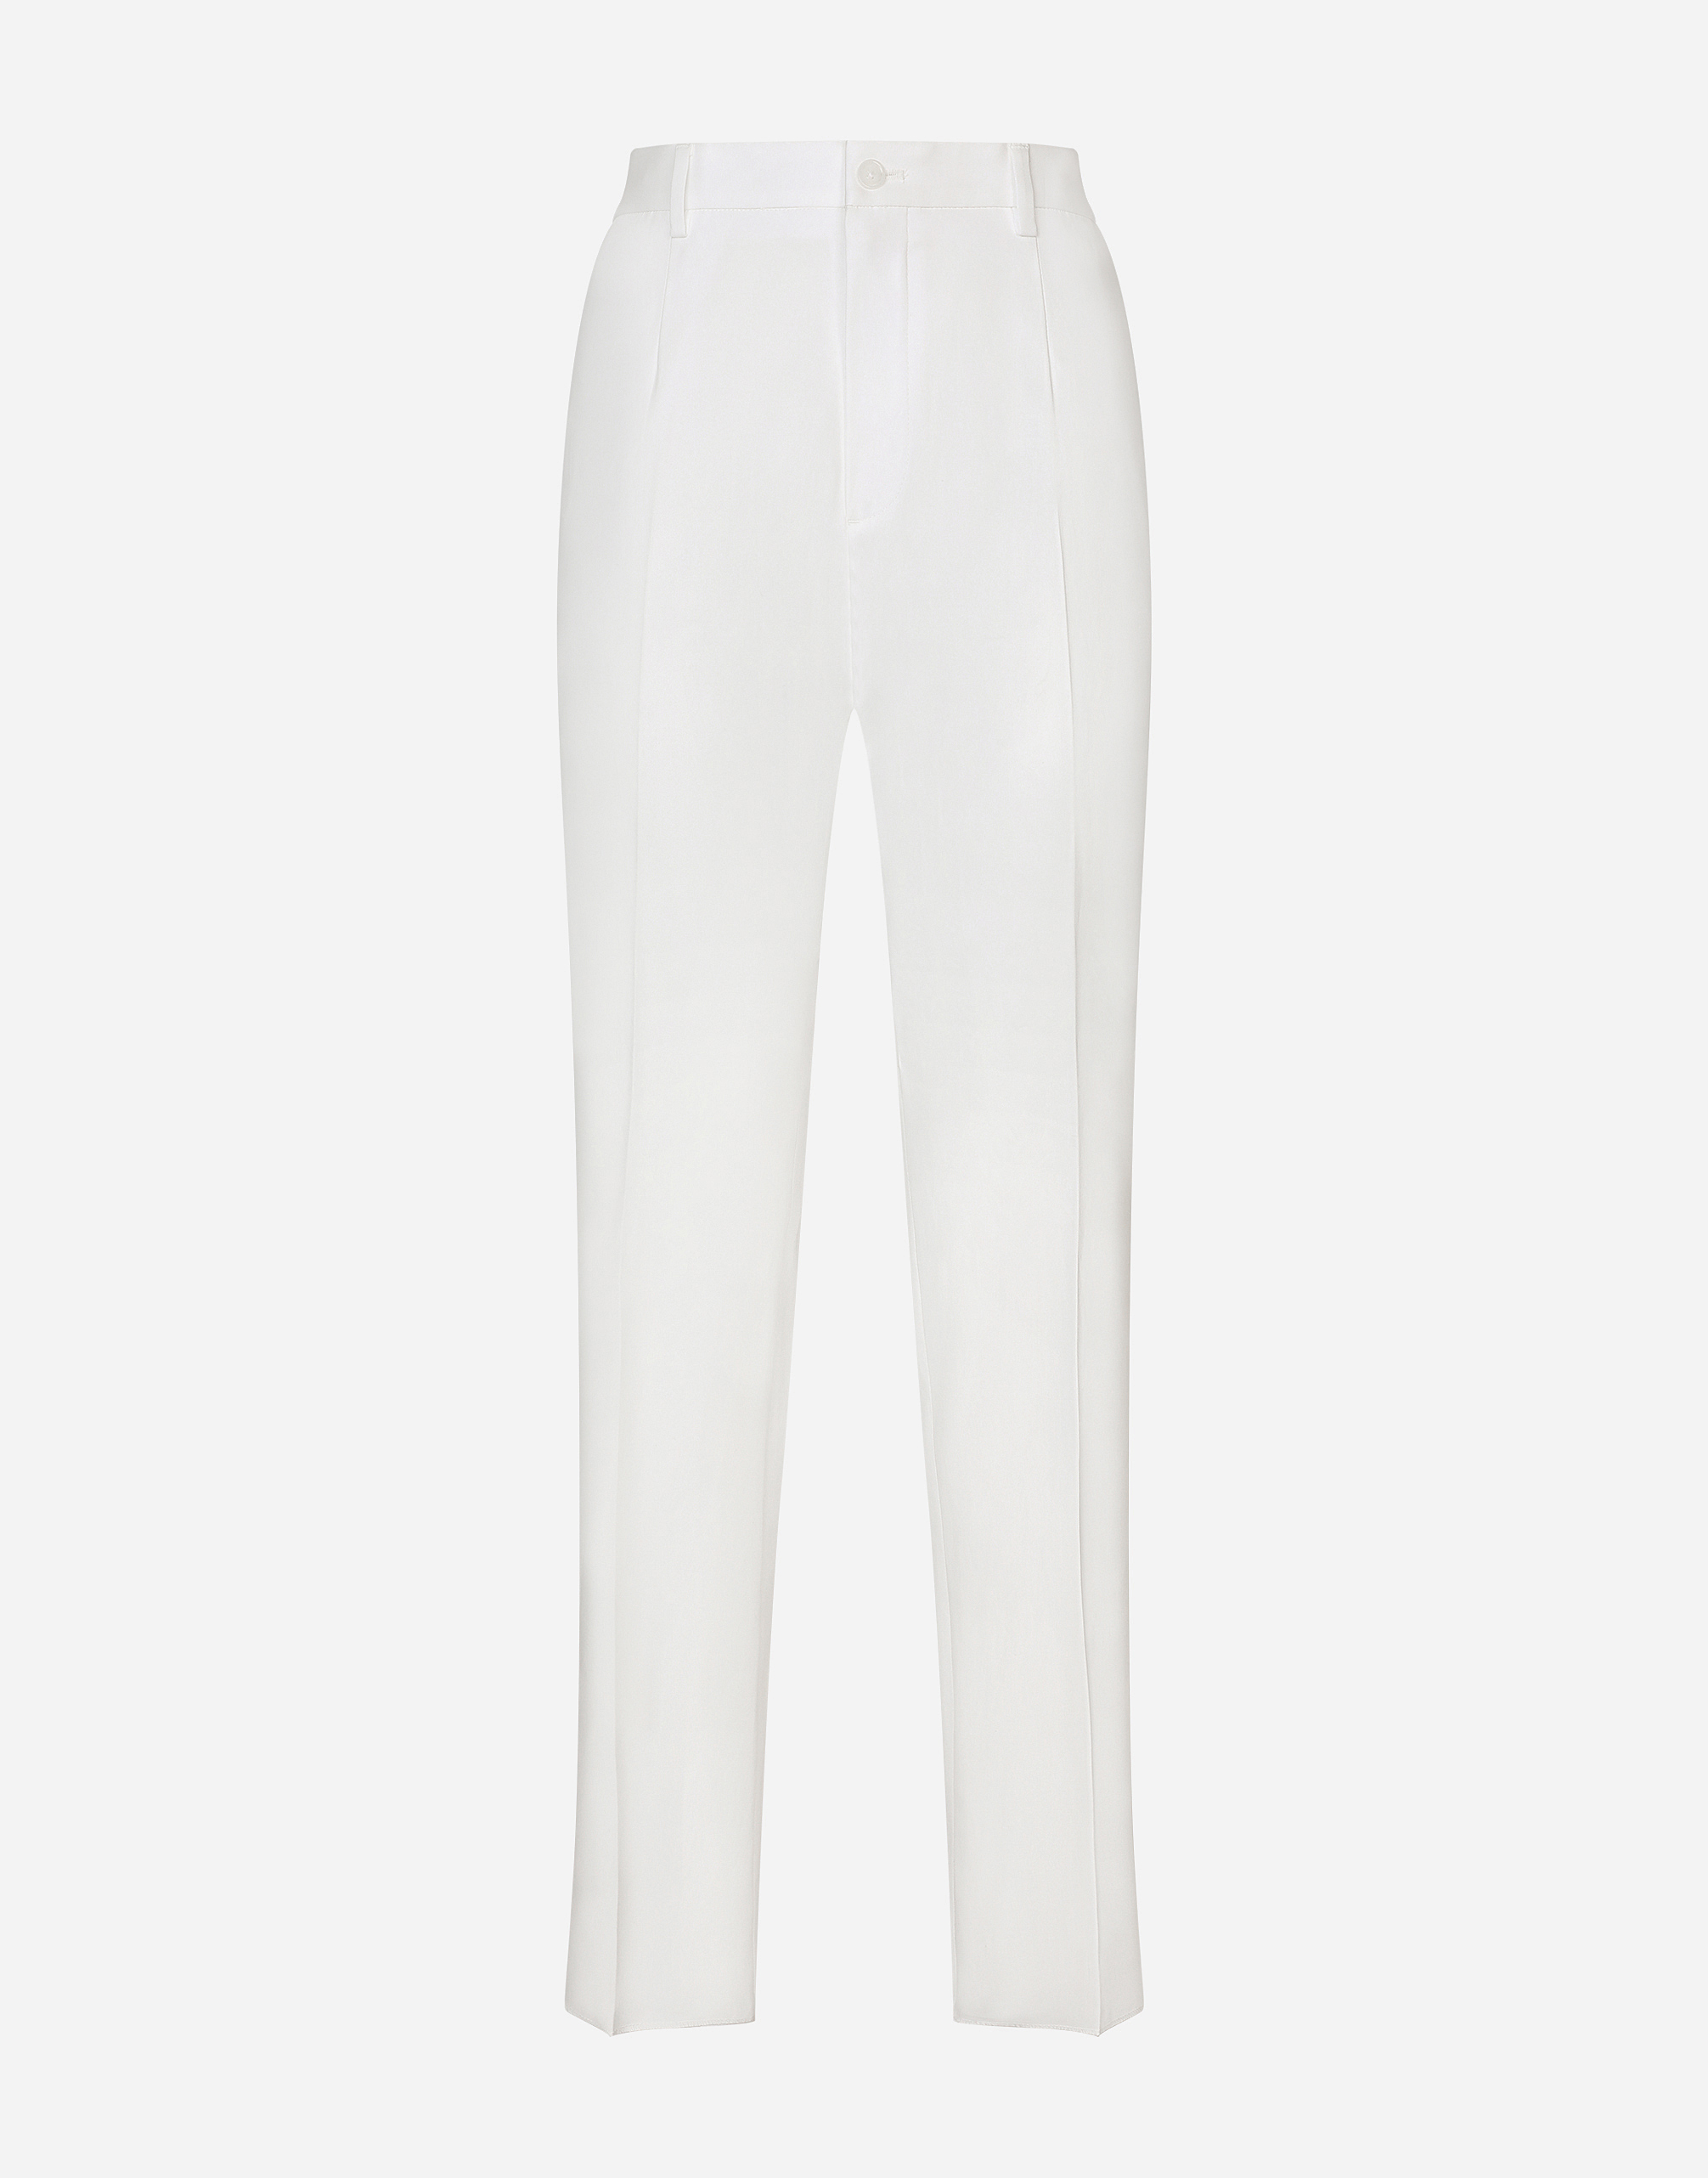 Dolce & Gabbana Stretch Cotton Pants With Branded Tag In White